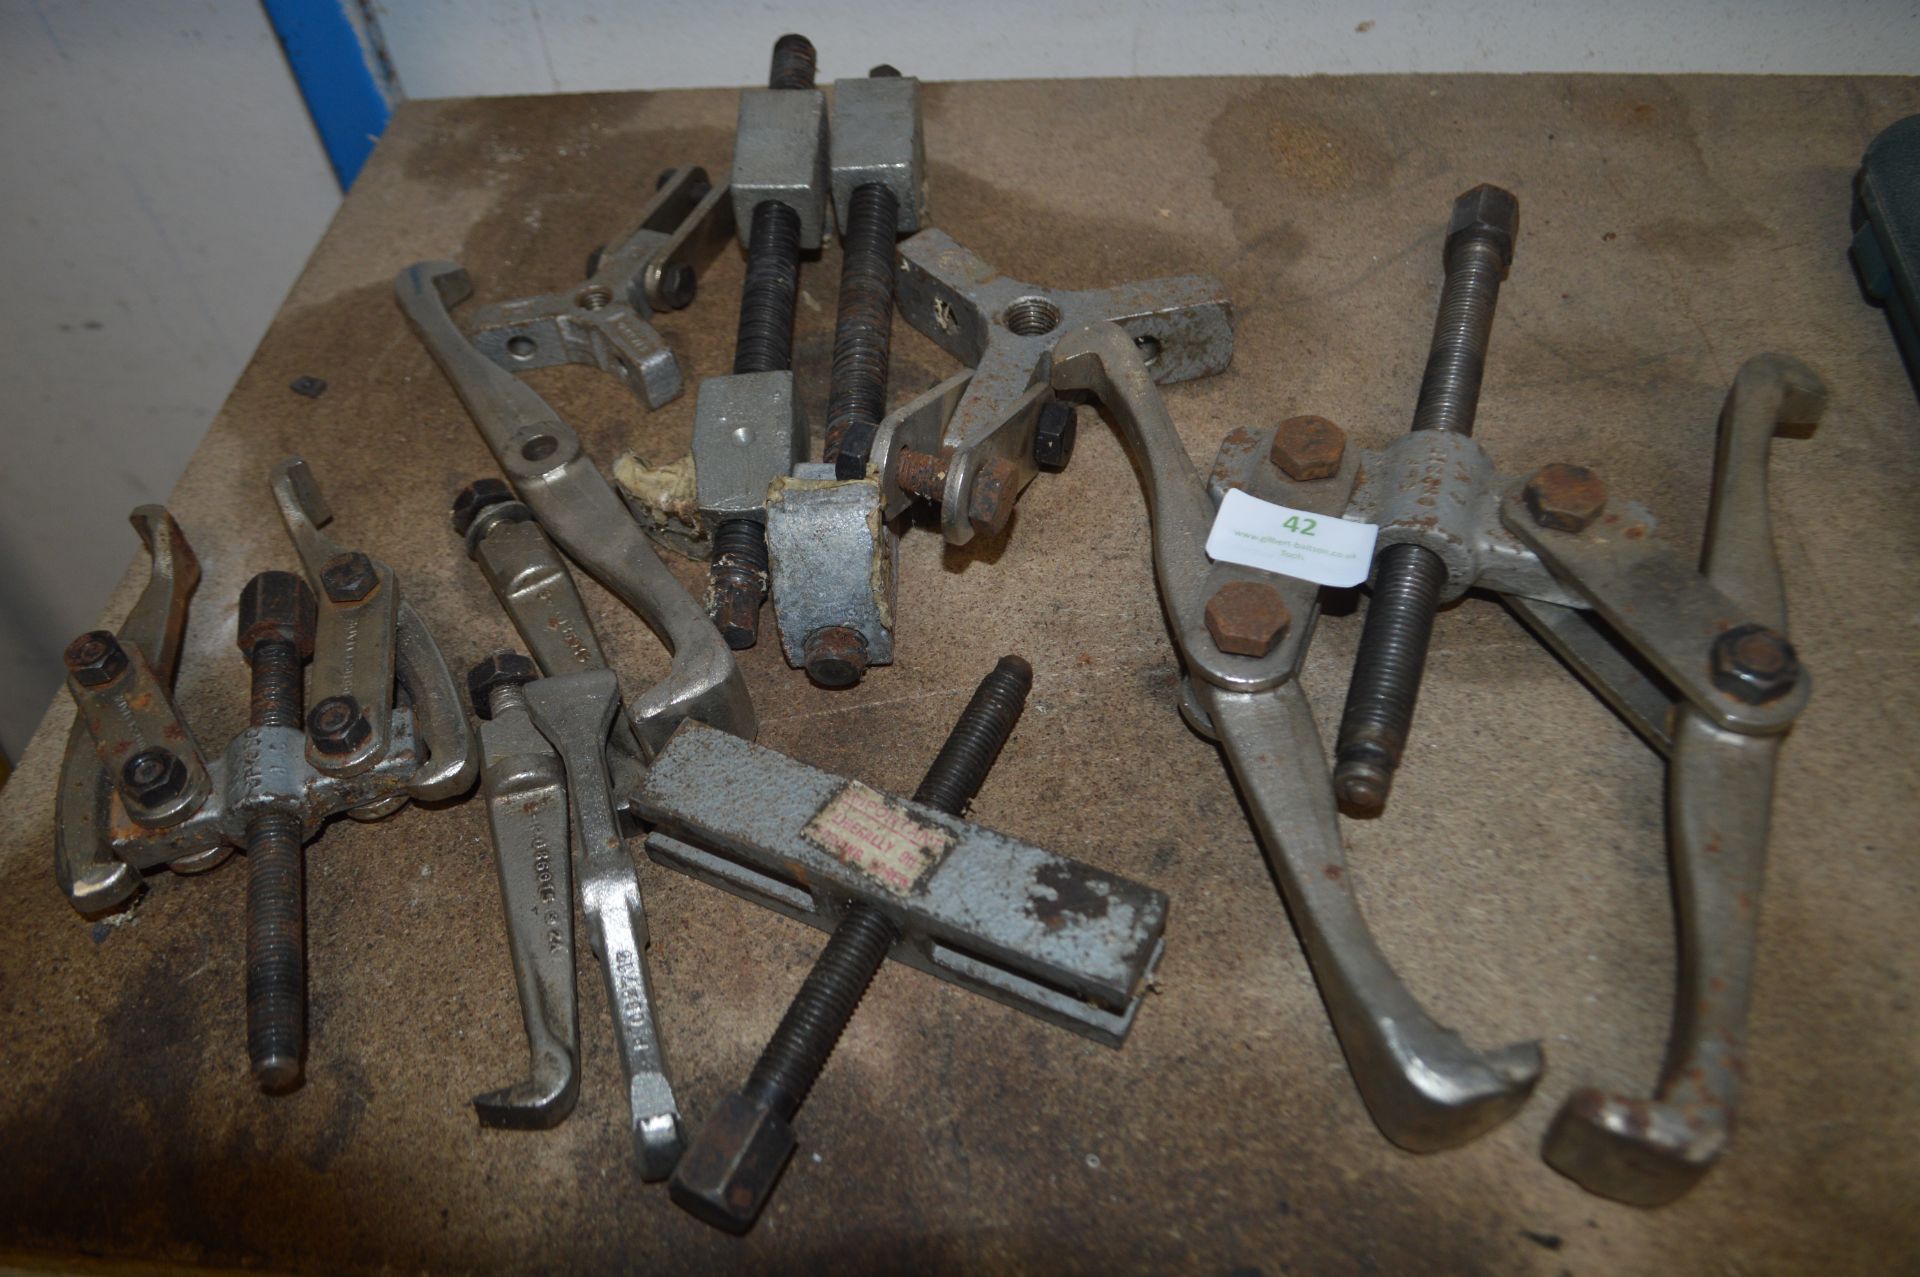 Quantity of Jaw Puller Parts